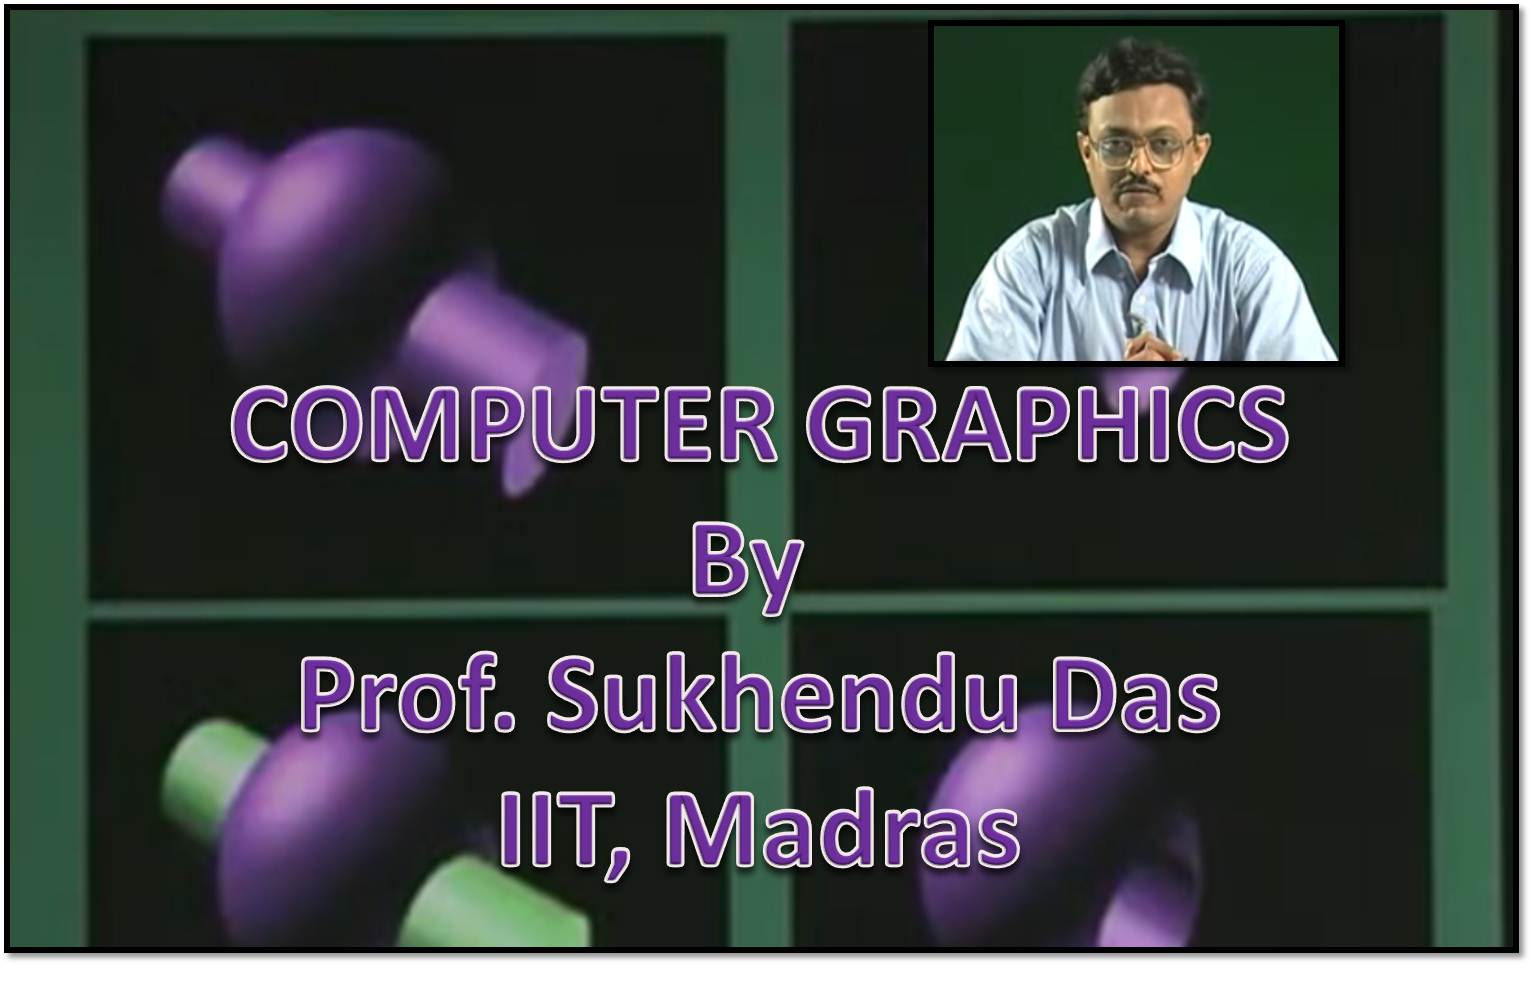 http://study.aisectonline.com/images/SubCategory/Video Lectures on Computer Graphics by Dr. Sukhendu Das,  IIT Madras.jpg